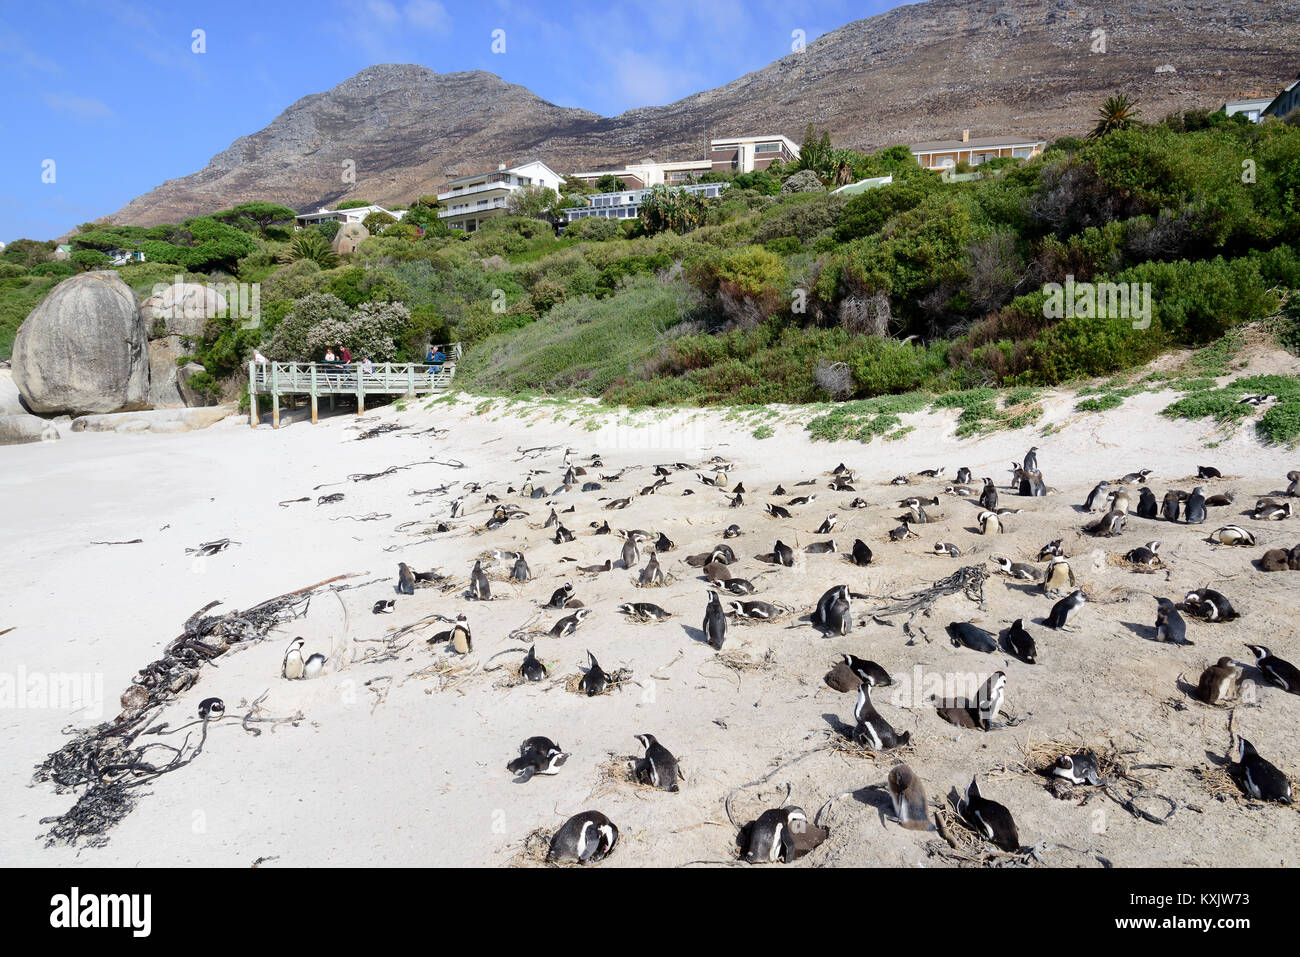 Colony of African penguins,Spheniscus demersus, Boulders Beach or Boulders Bay, Simons Town, South Africa, Indian Ocean Stock Photo